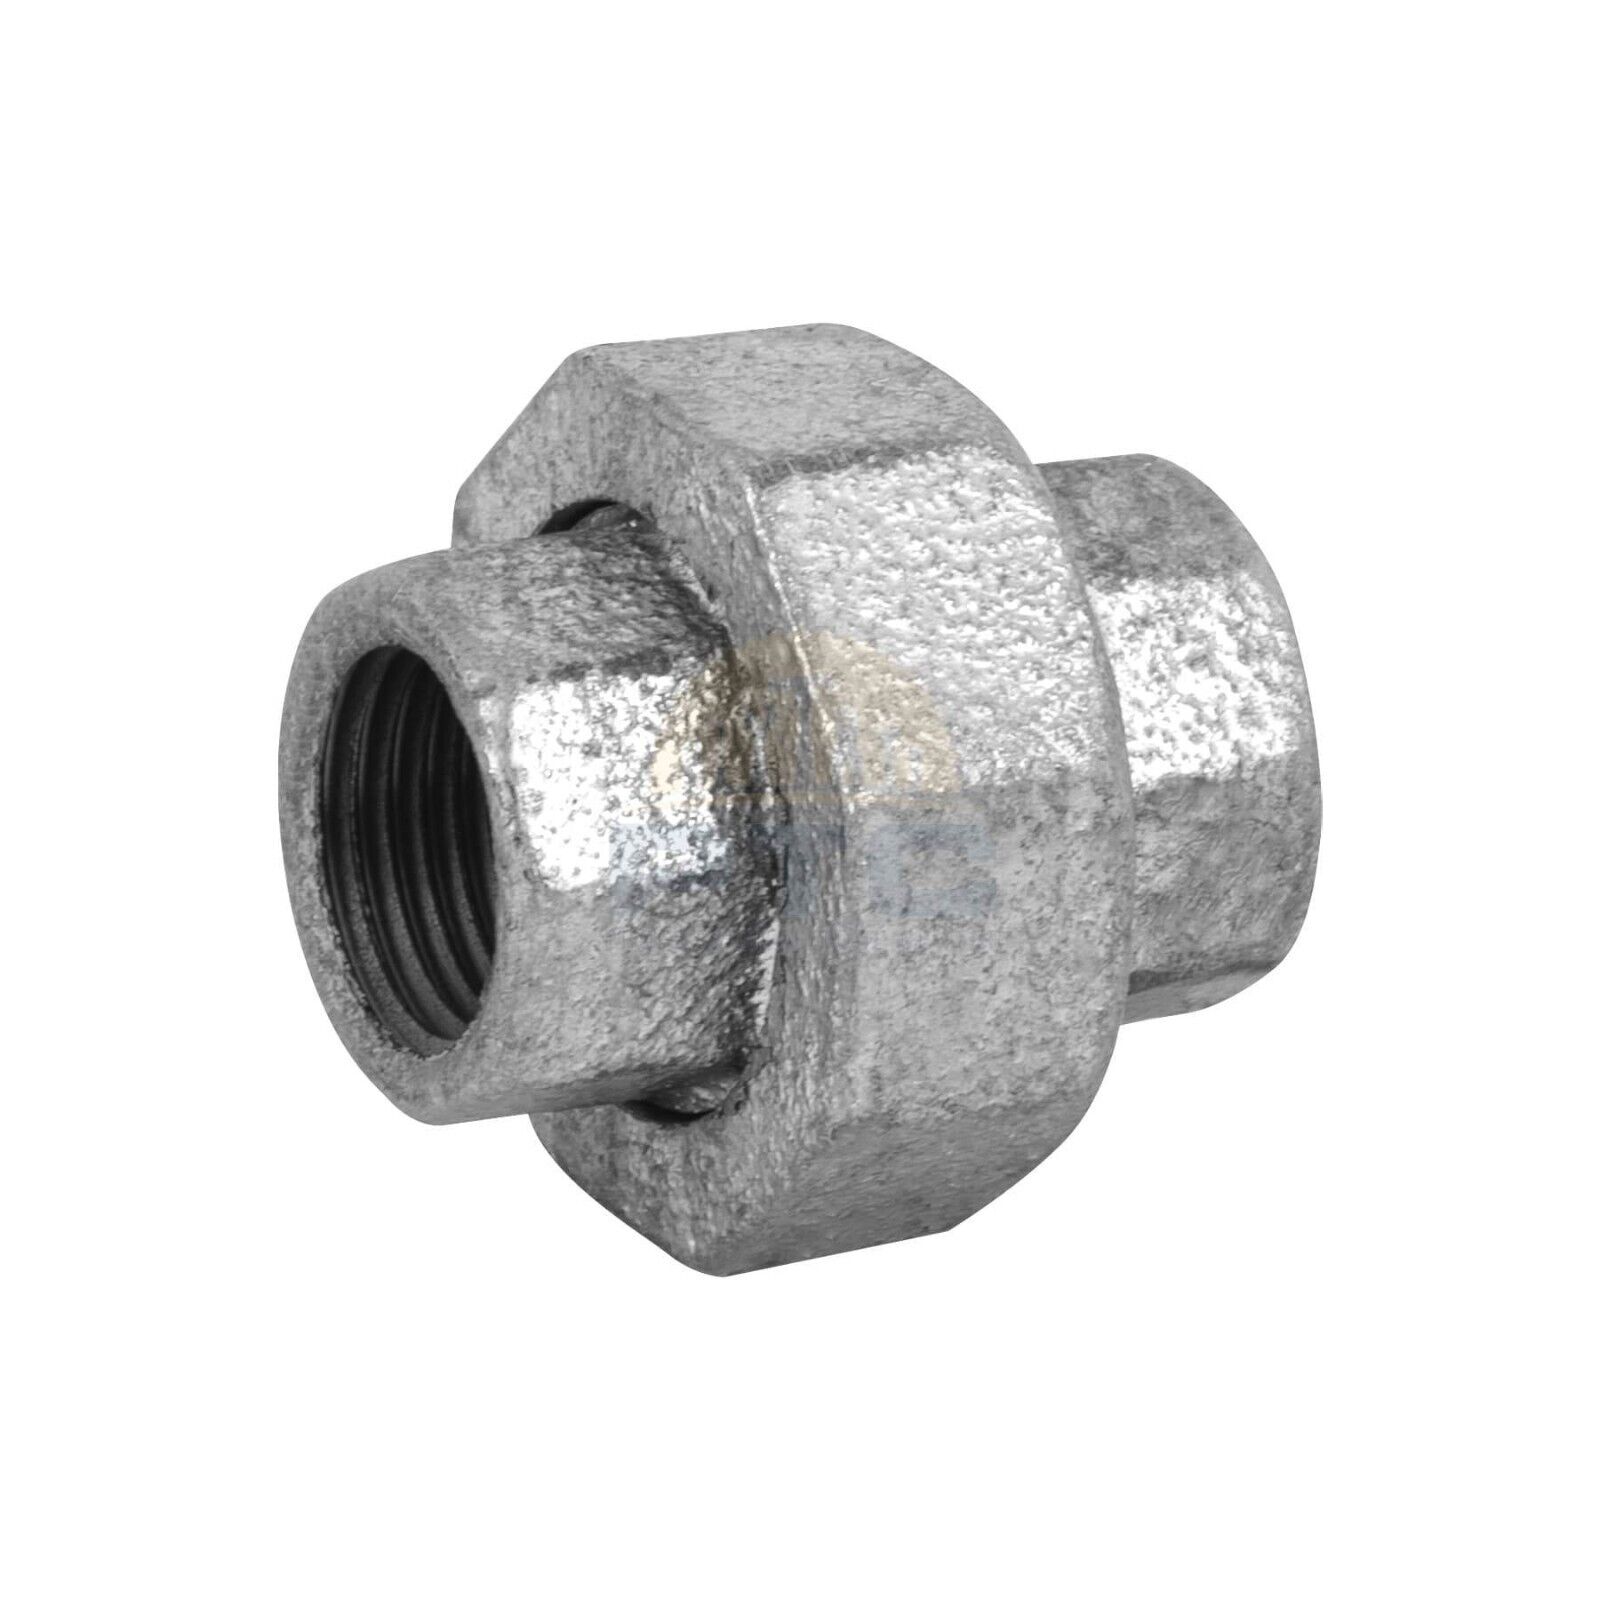 Foset Adapters for Galvanized Steel Pipes and Nuts 1/2"